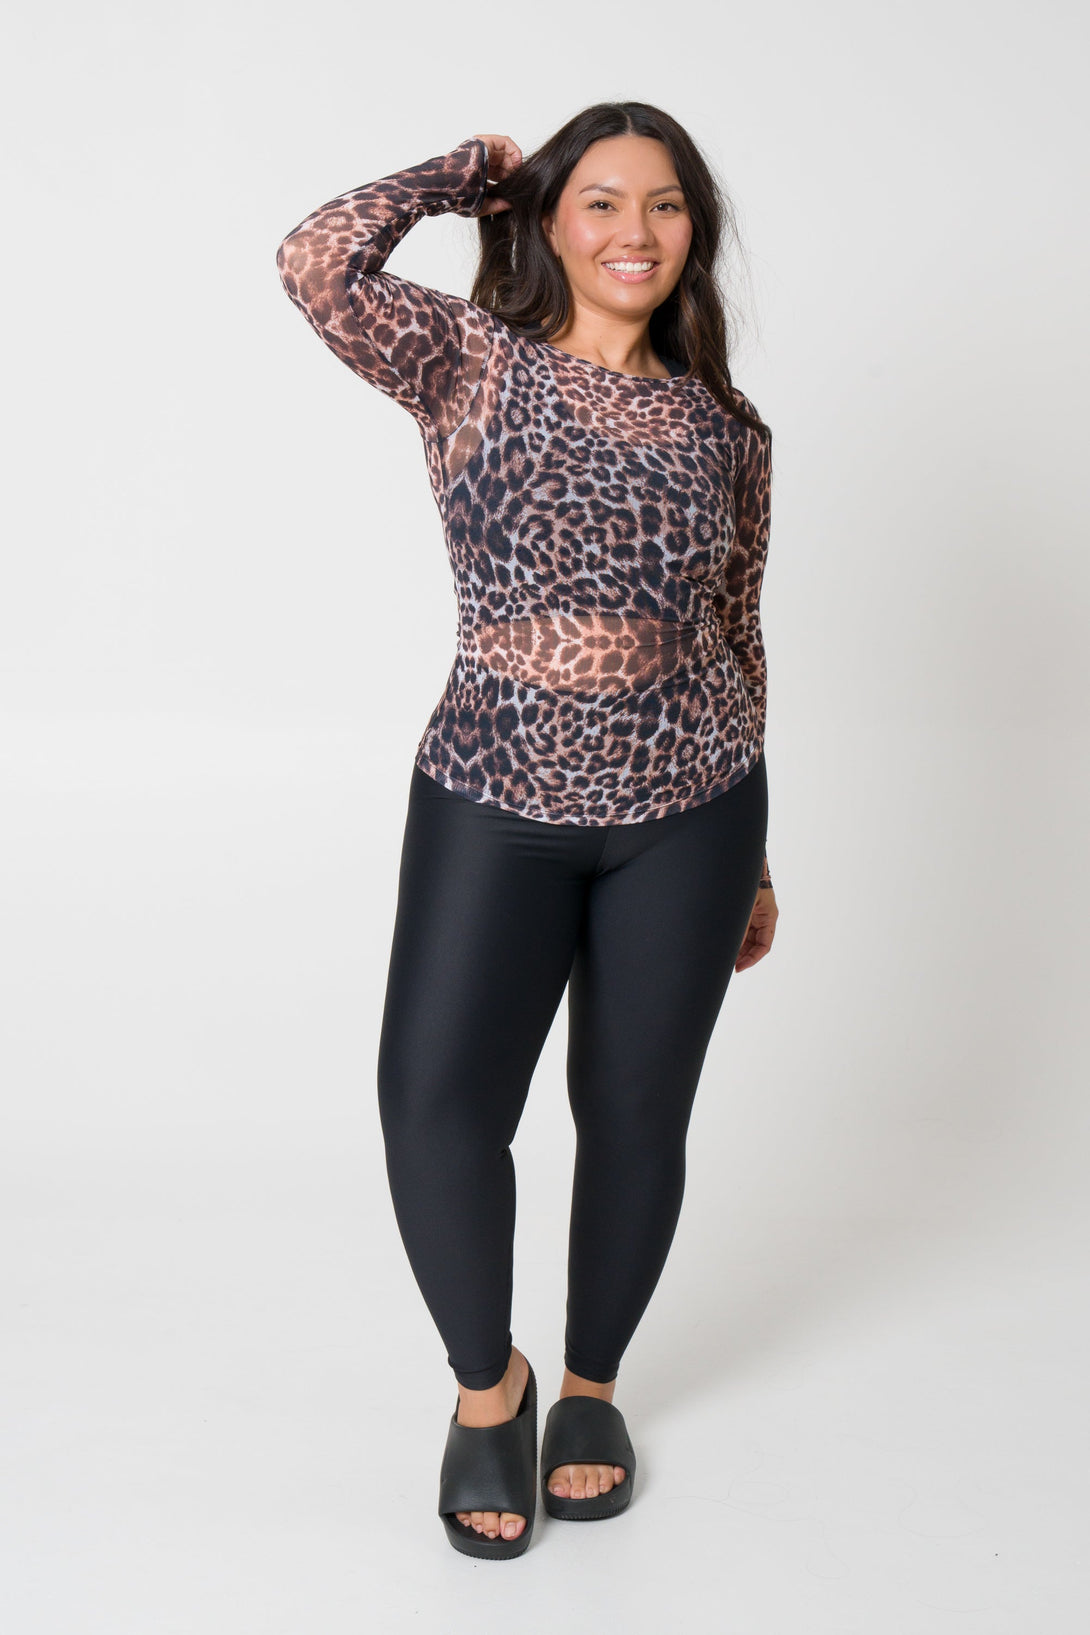 Cave Girl Net - Fitted Long Sleeve Tee-Activewear-Exoticathletica